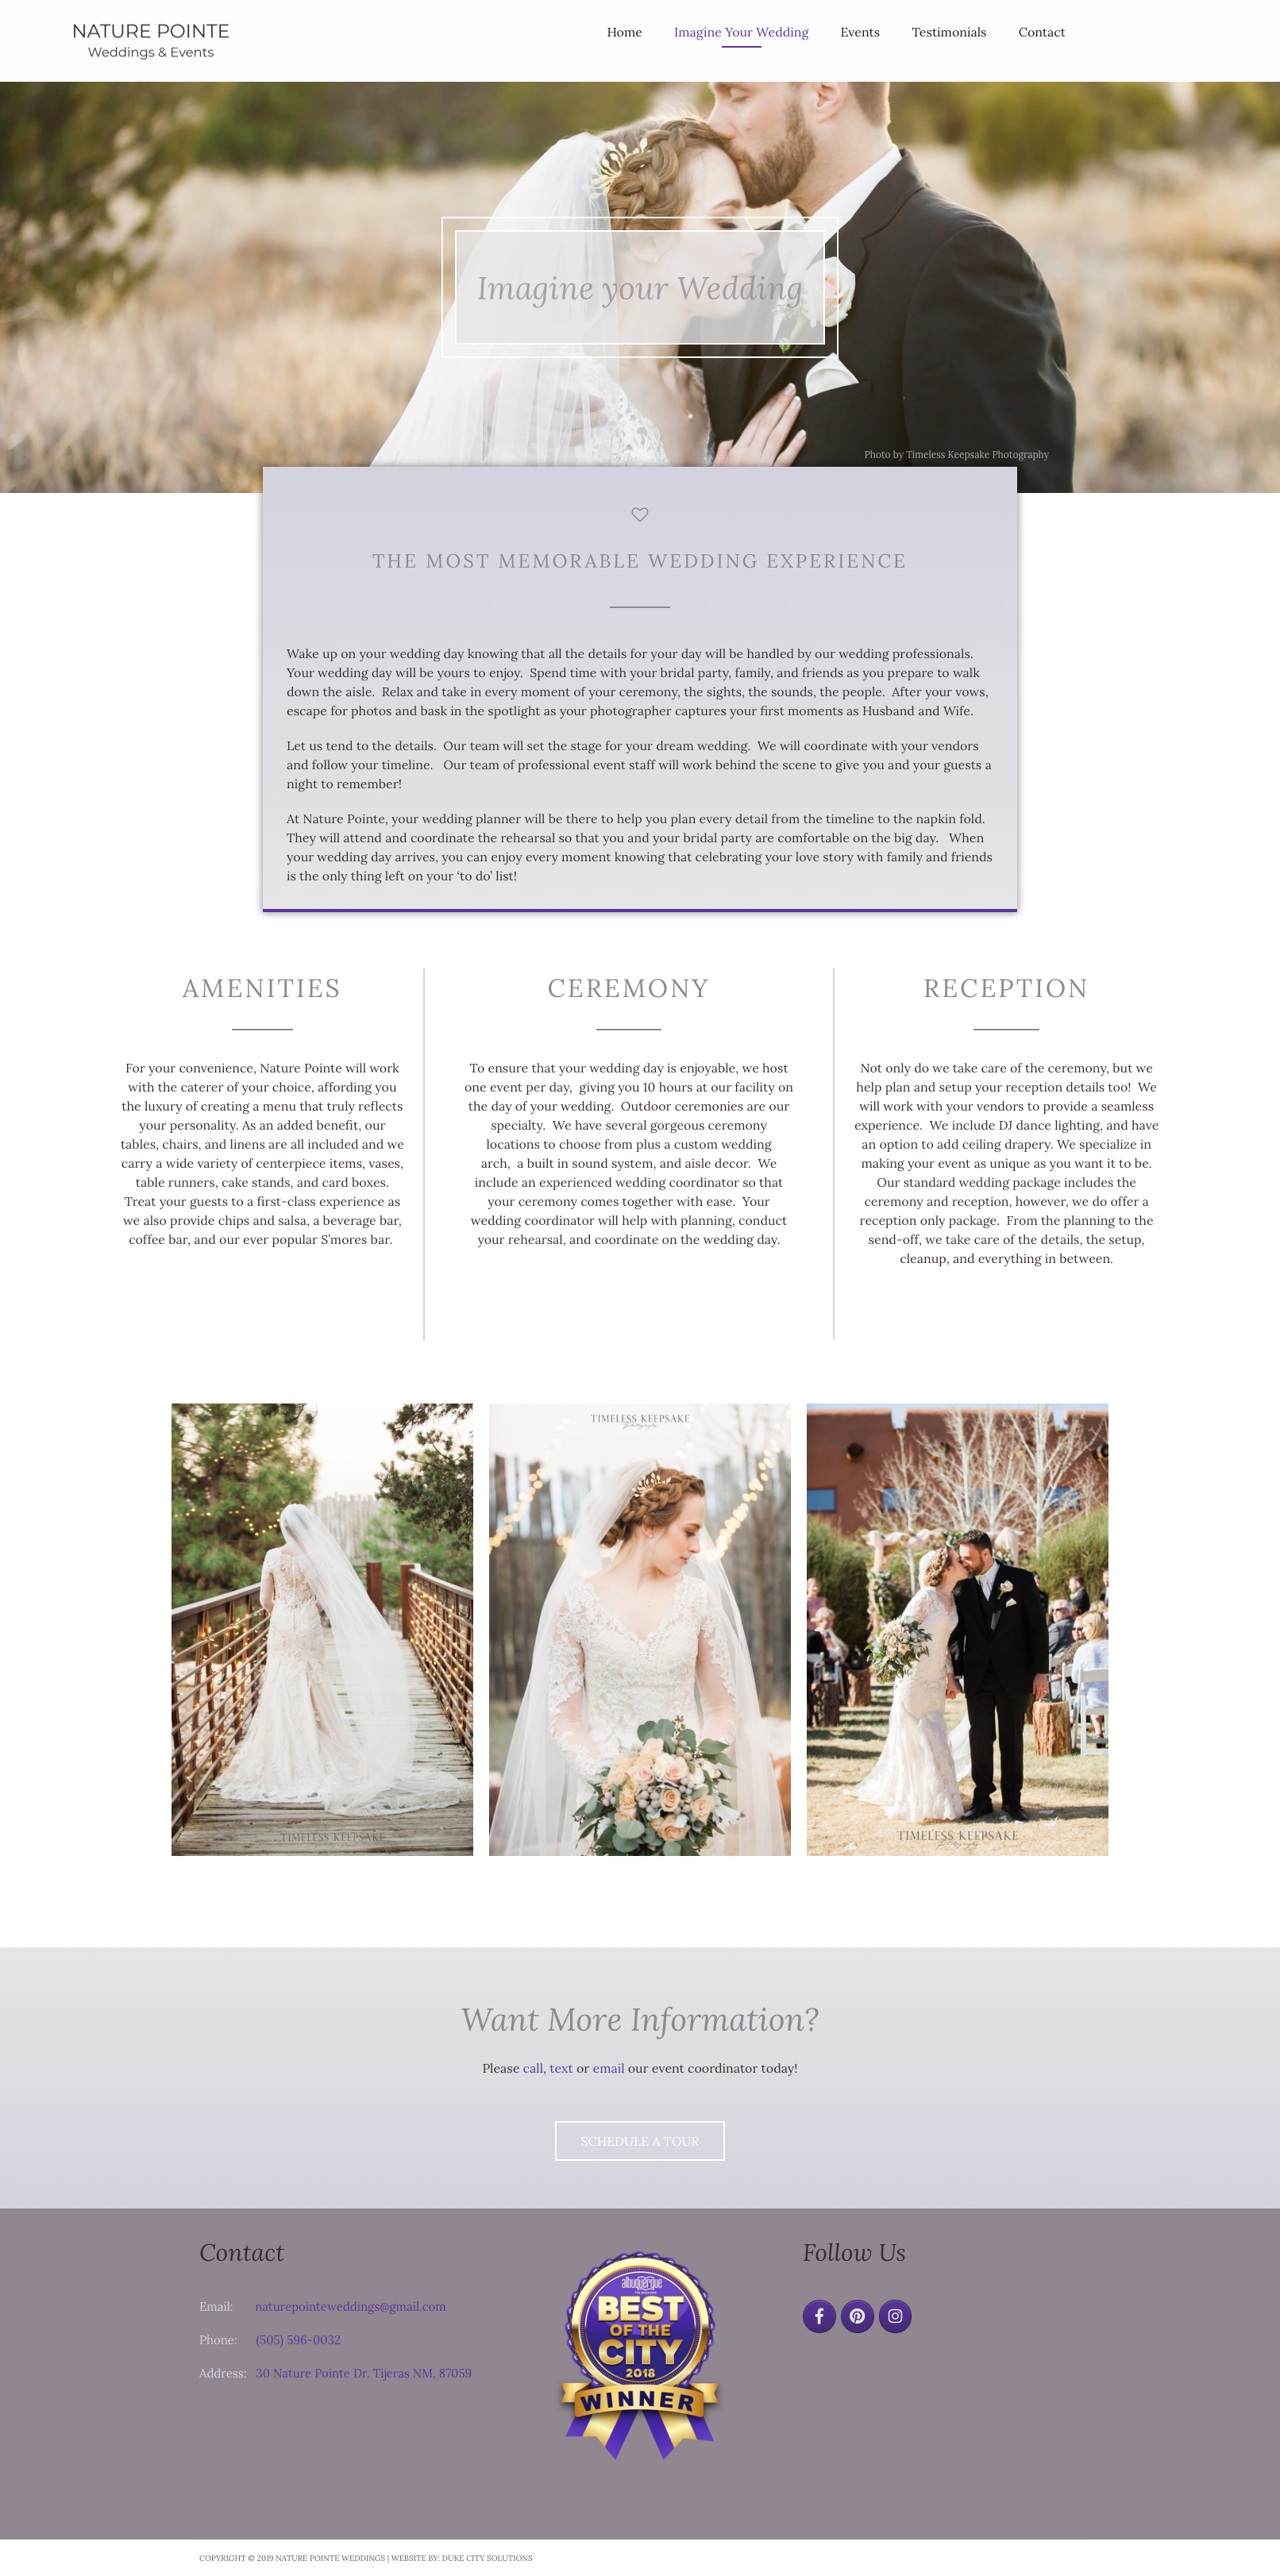 Nature Pointe Weddings and Events Website Design